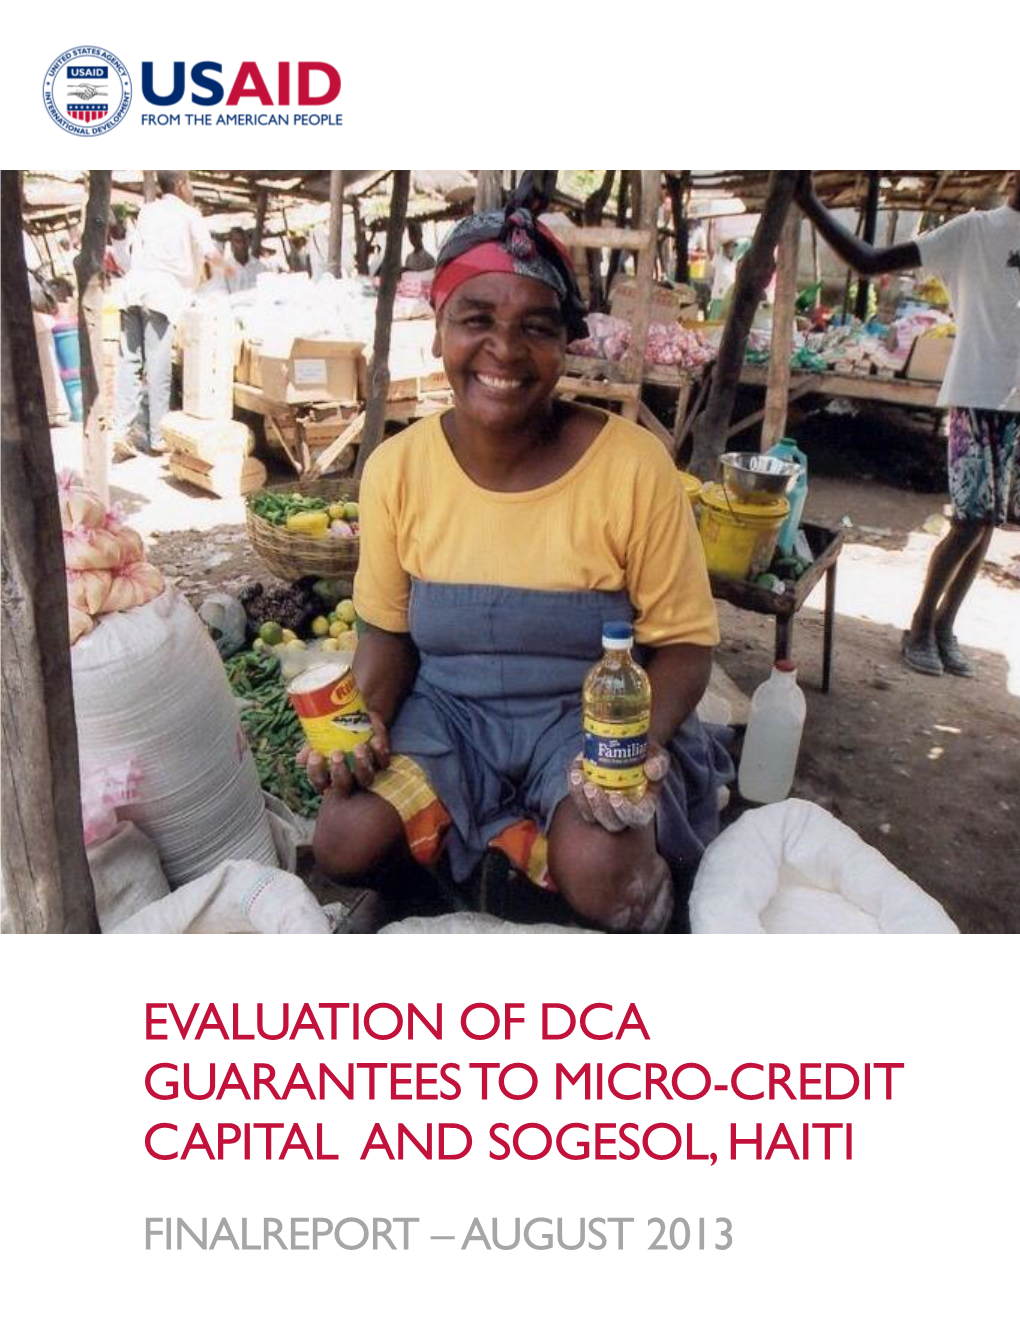 Evaluation of DCA Guarantees to MCC and SOGESOL